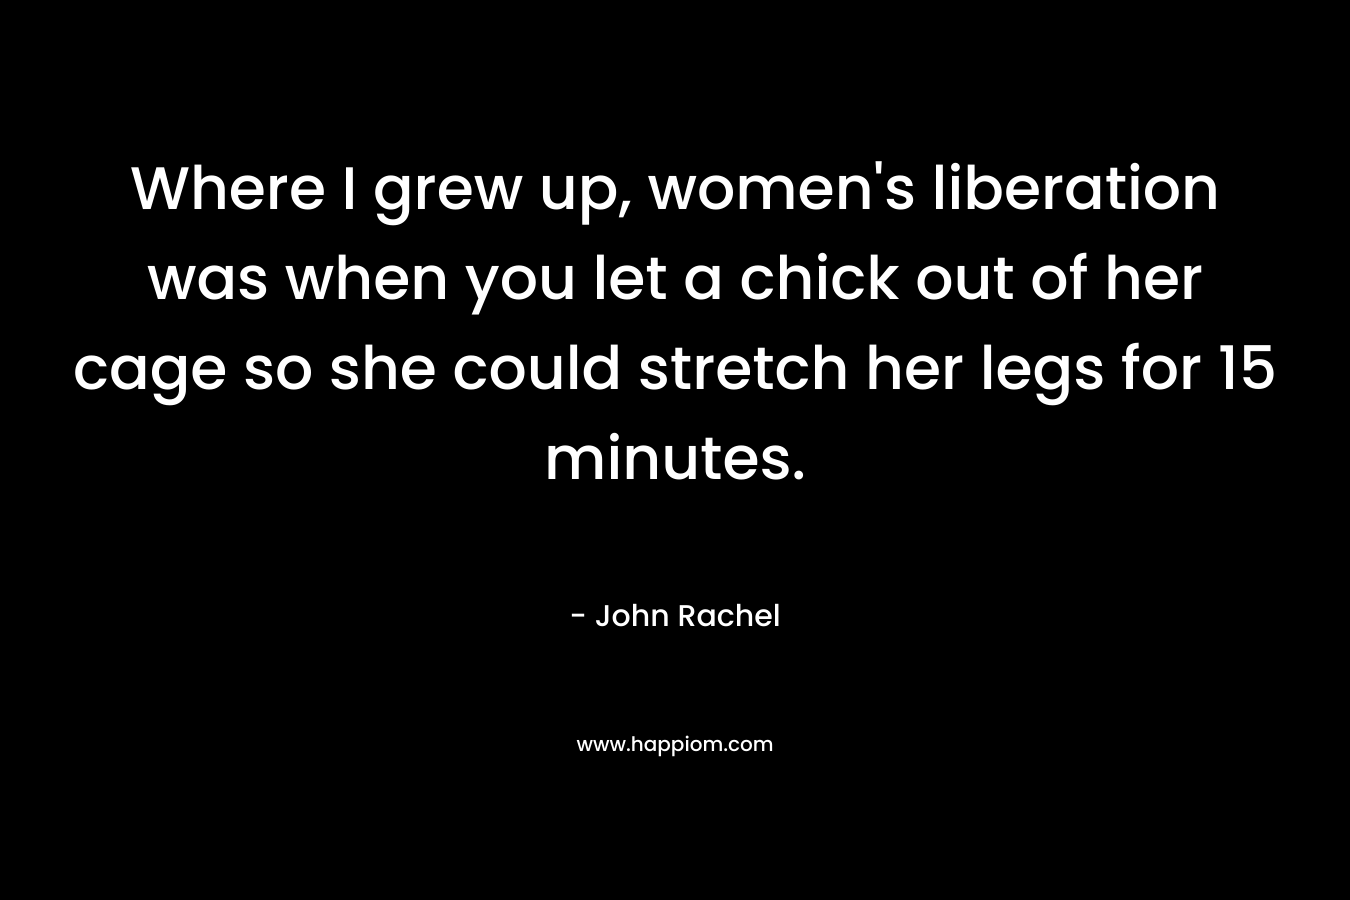 Where I grew up, women’s liberation was when you let a chick out of her cage so she could stretch her legs for 15 minutes. – John Rachel